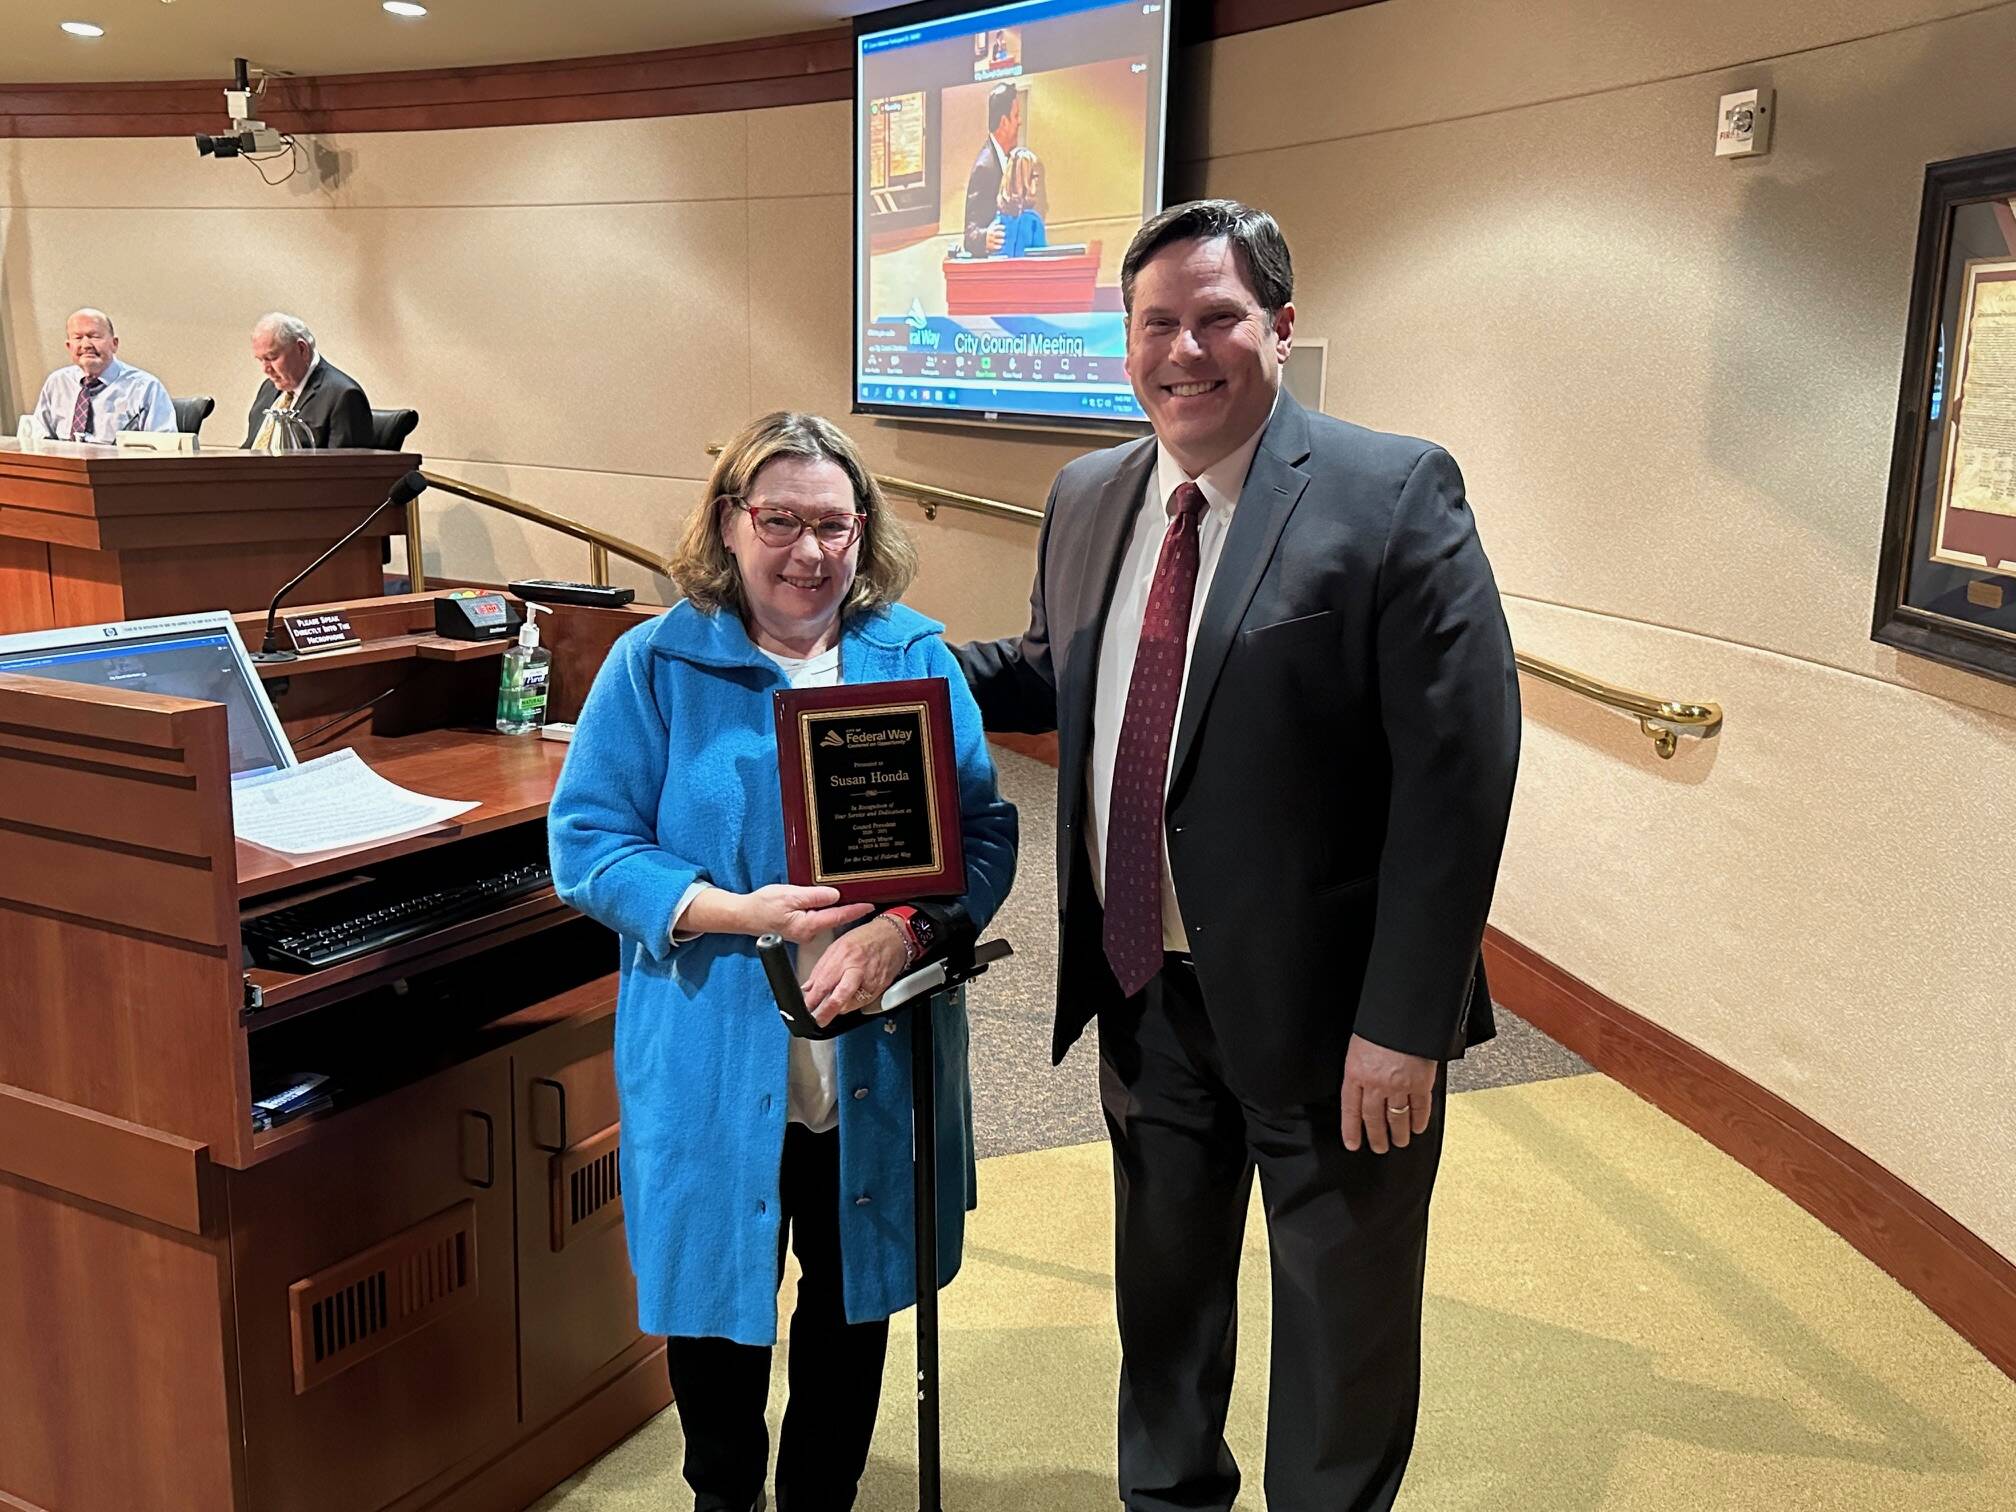 Susan Honda was honored for her contributions by Mayor Jim Ferrell at the Federal Way City Council meeting. Photo by David Solano / City of Federal Way